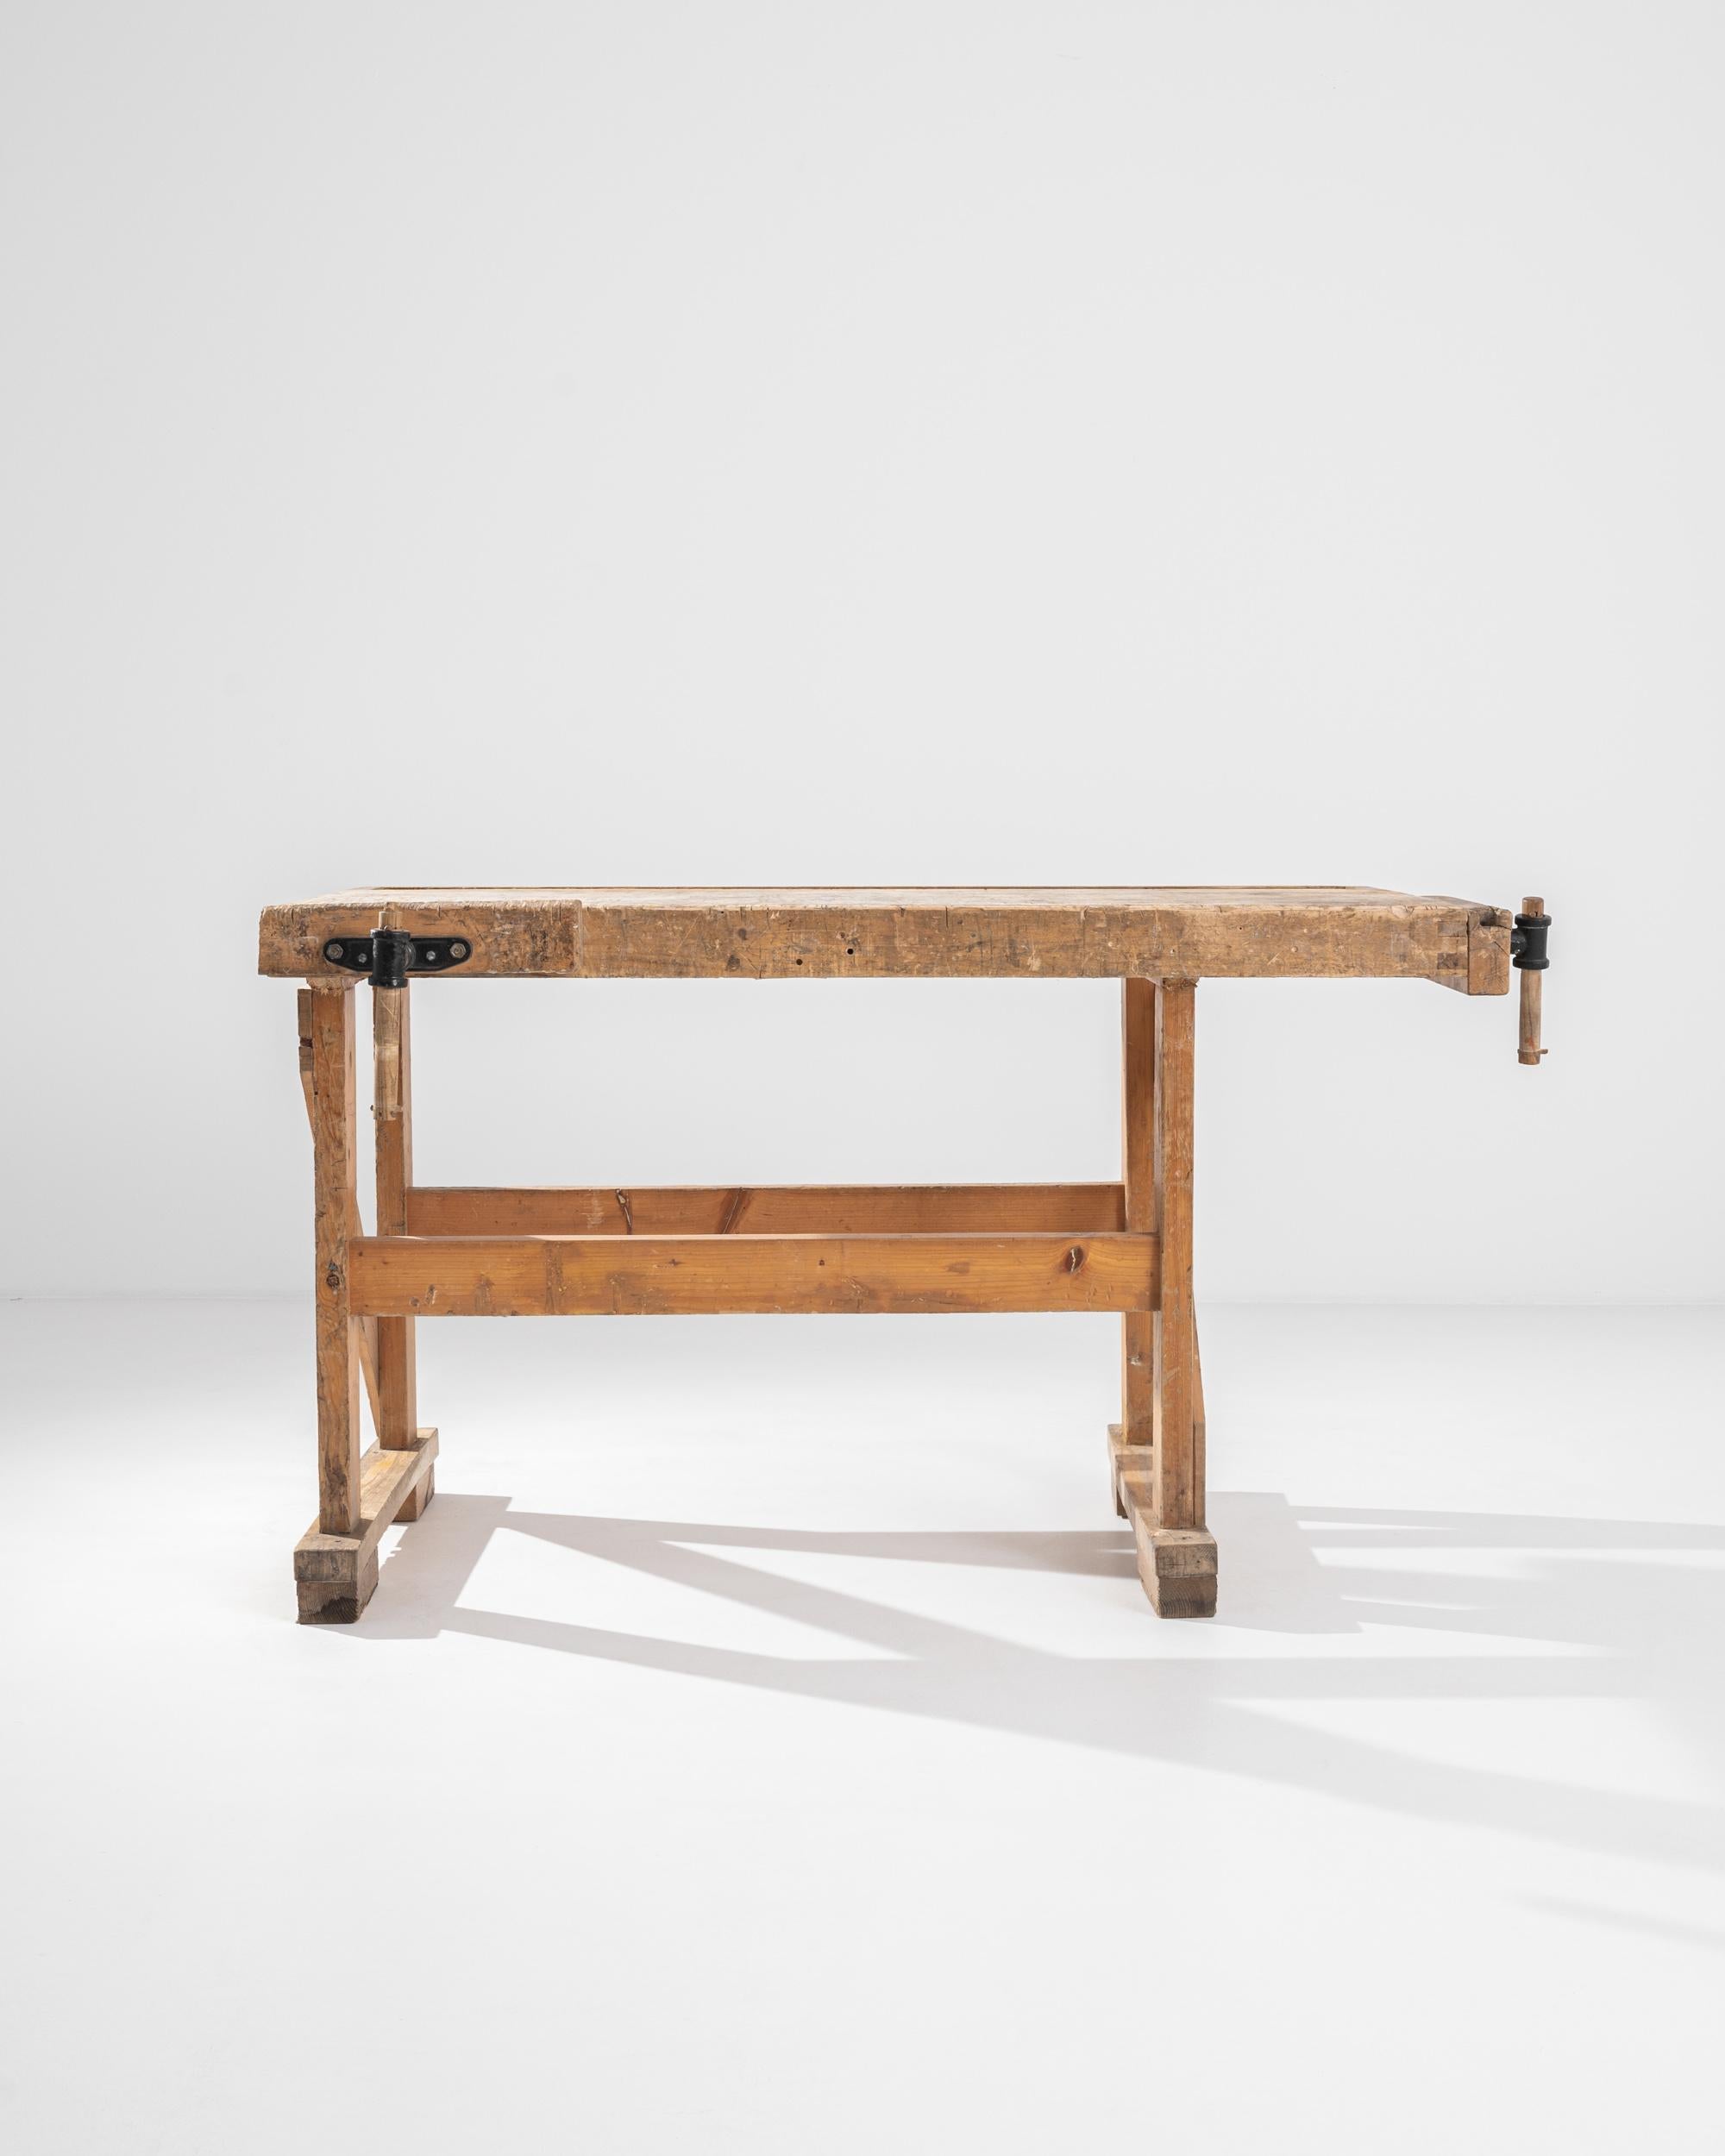 A vintage Central European wooden work table. Constructed from stout wooden beams, crafted with the owner’s livelihood in mind. This ultimate sturdy table’s newest craft is turning function into style. Worn and loved, the details in its